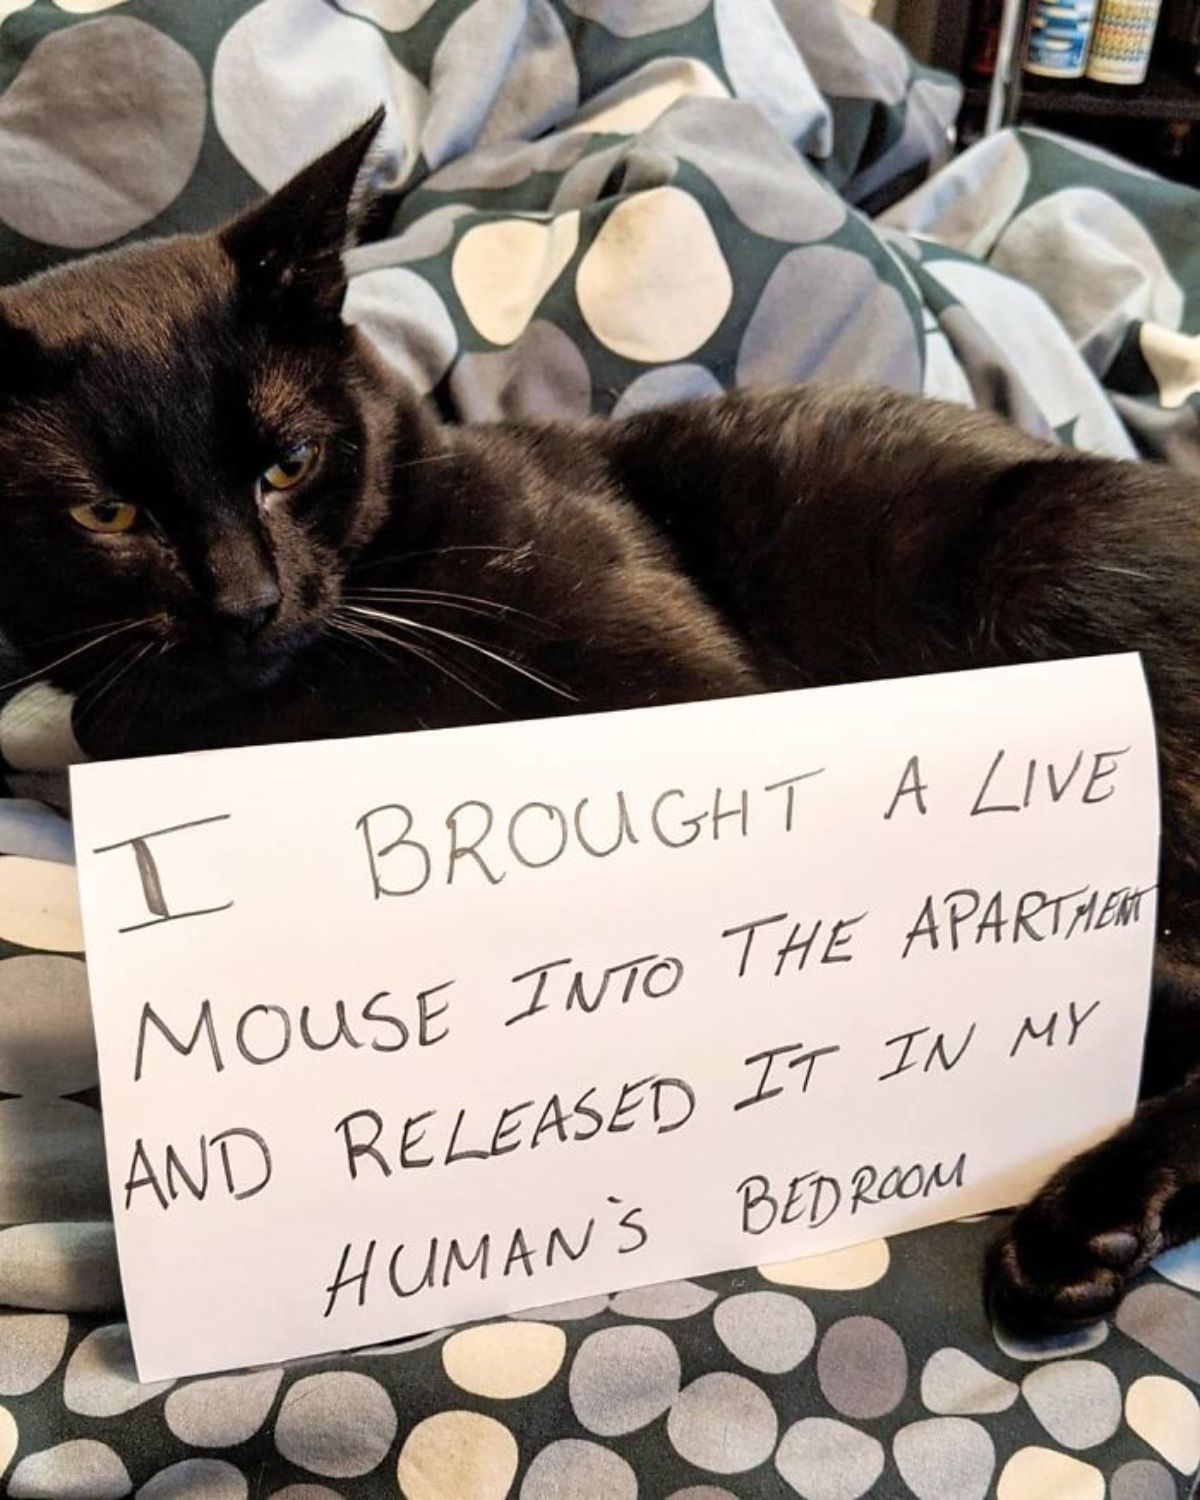 black cat is laying on a green grey brown and beige patterned bed with a note saying that it brought a live mouse into the house and released it in the human's bedroom